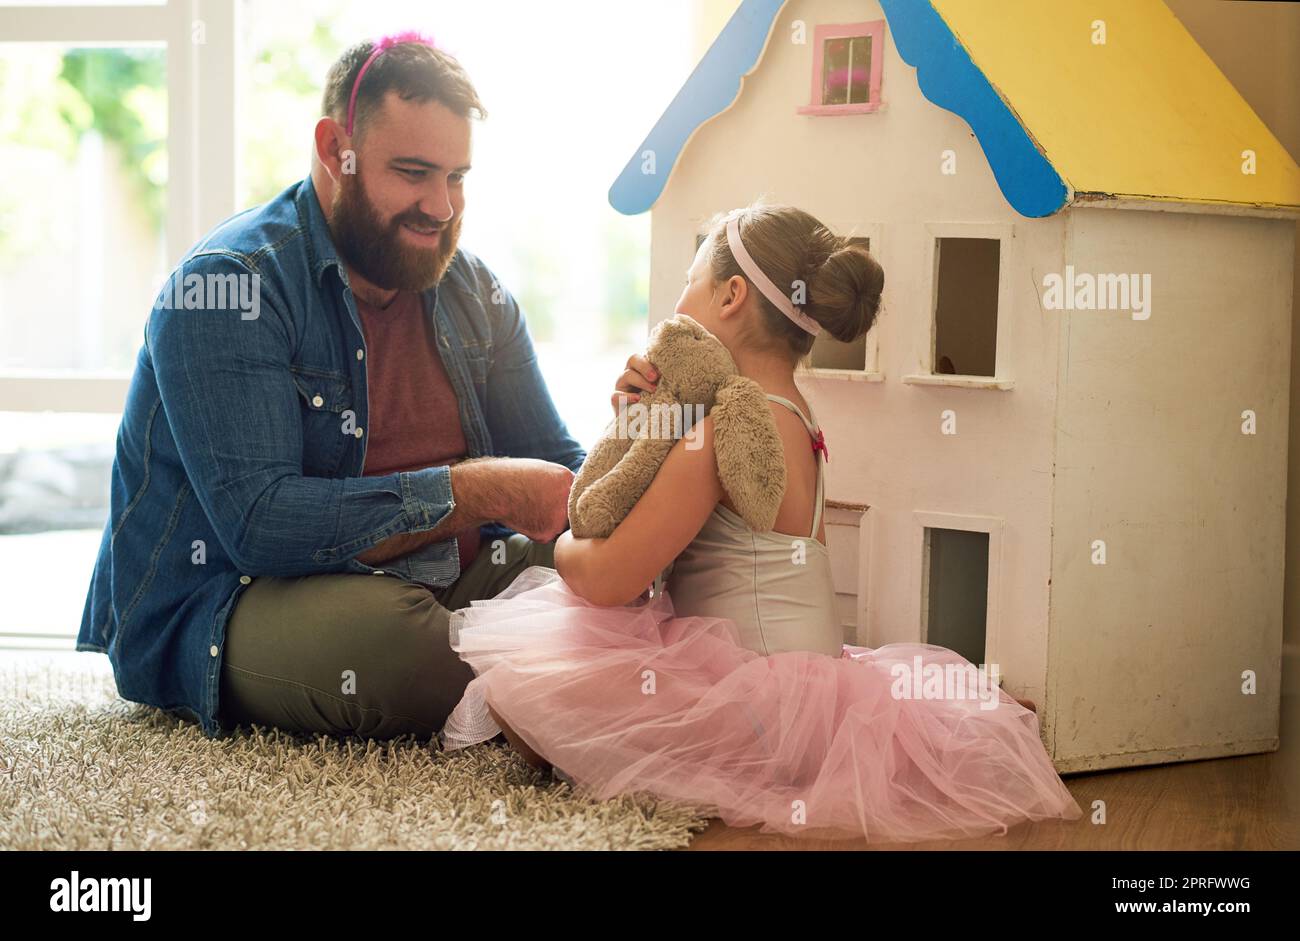 Getting involved in her imaginative play. an adorable little girl and her father playing with a dollhouse together at home. Stock Photo